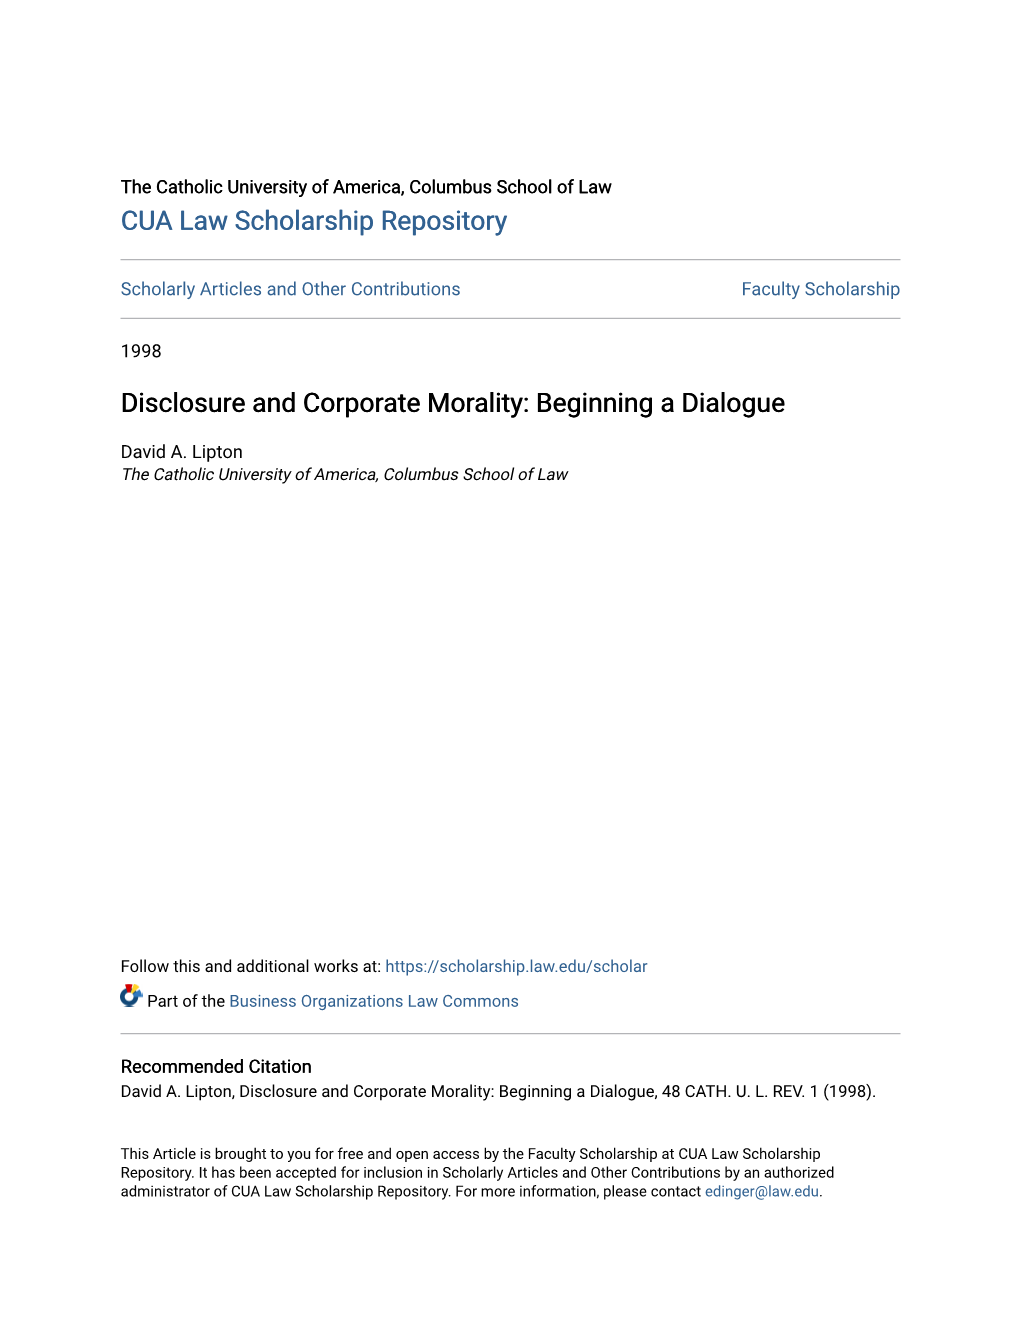 Disclosure and Corporate Morality: Beginning a Dialogue